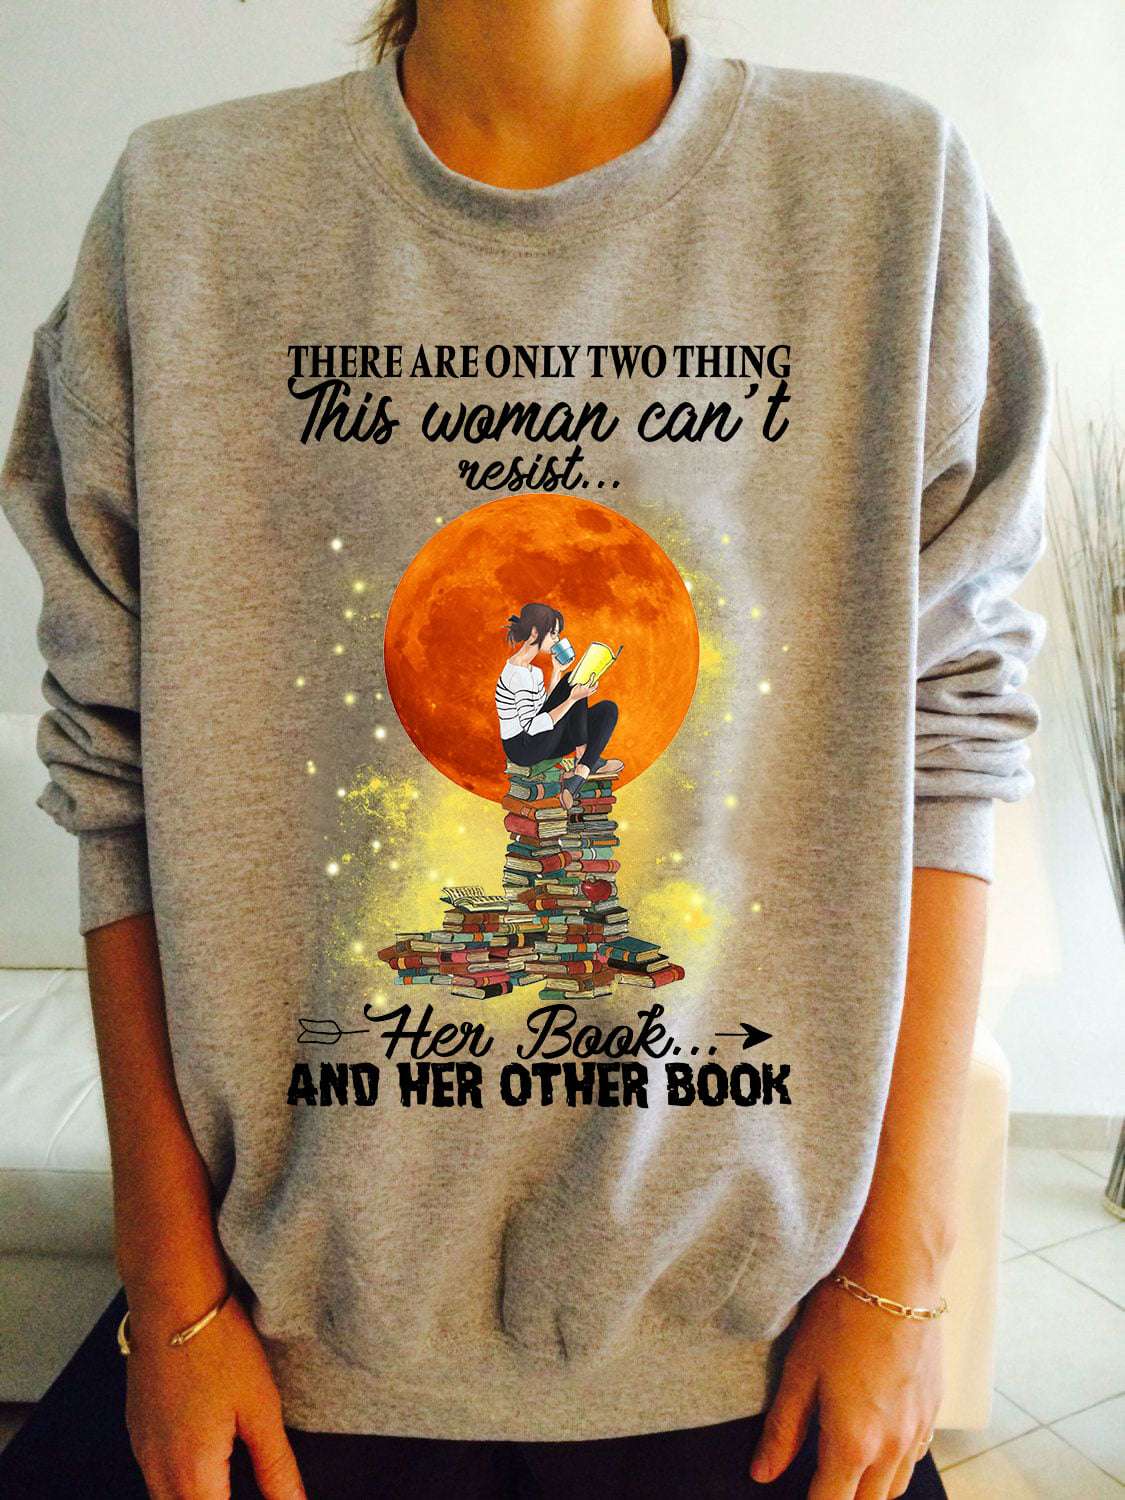 Woman Read Book - There are only two thing this woman can't resist her book and her other book